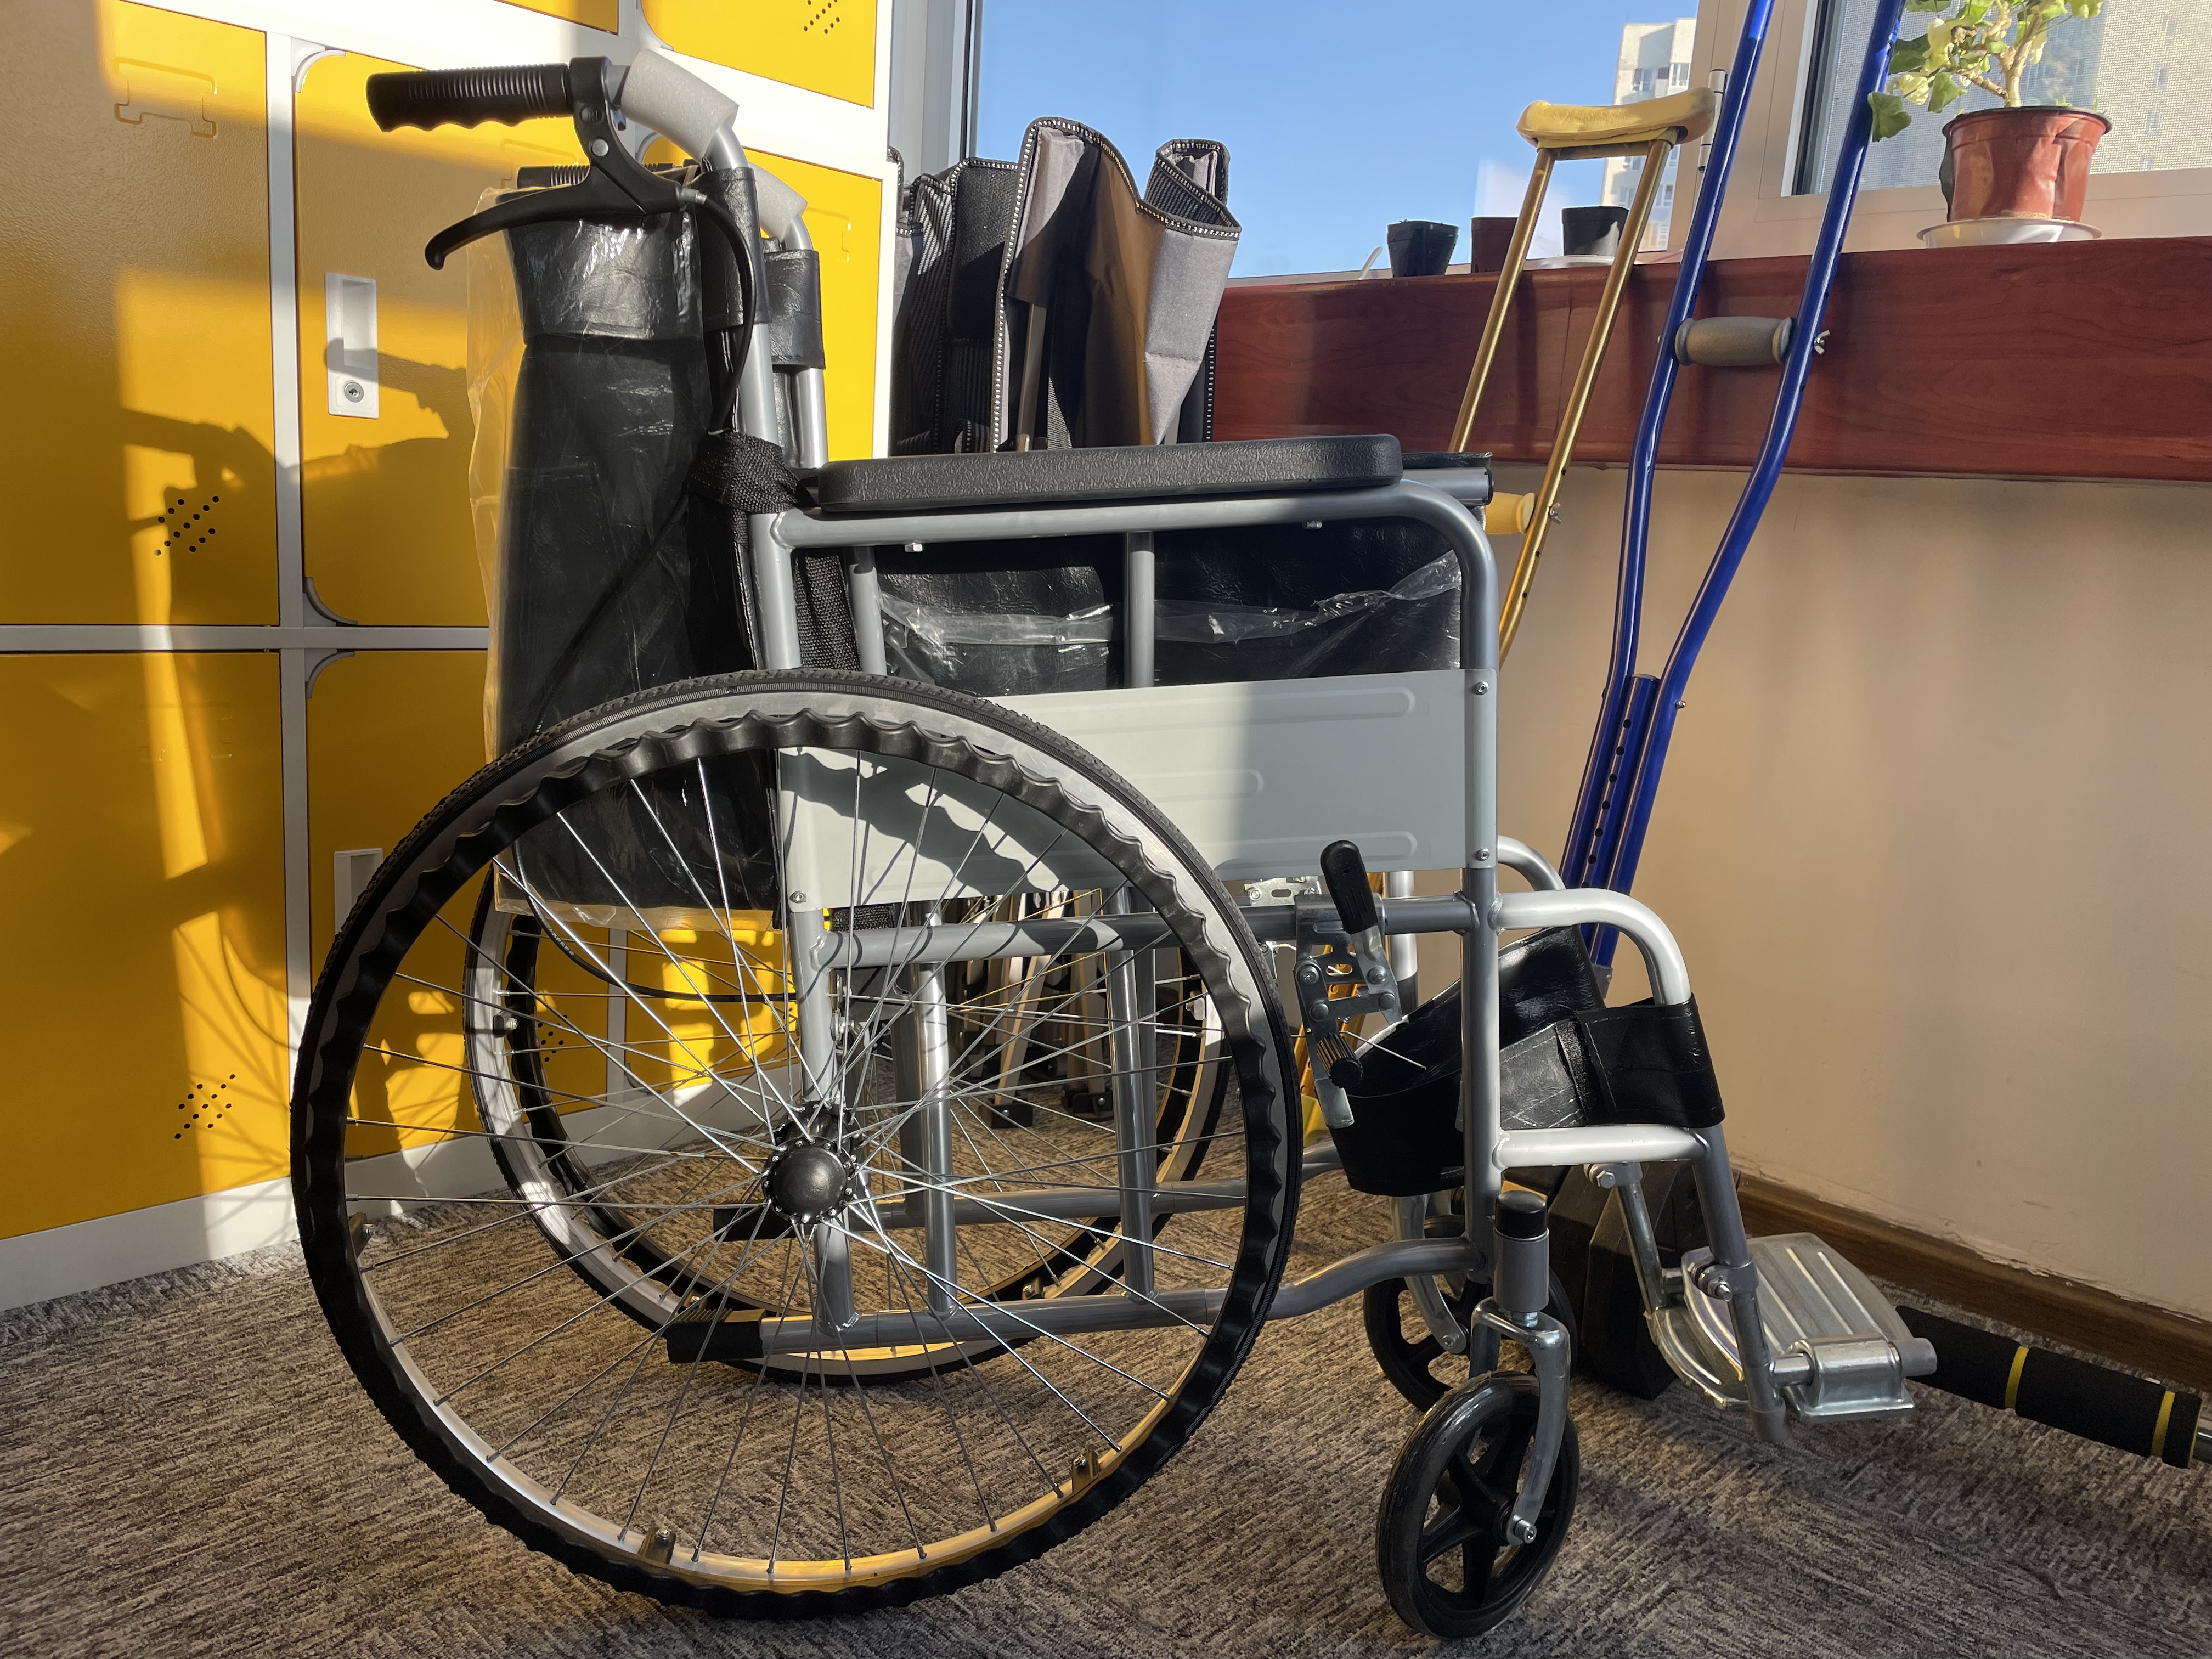 What kind of wheelchair does the client need?